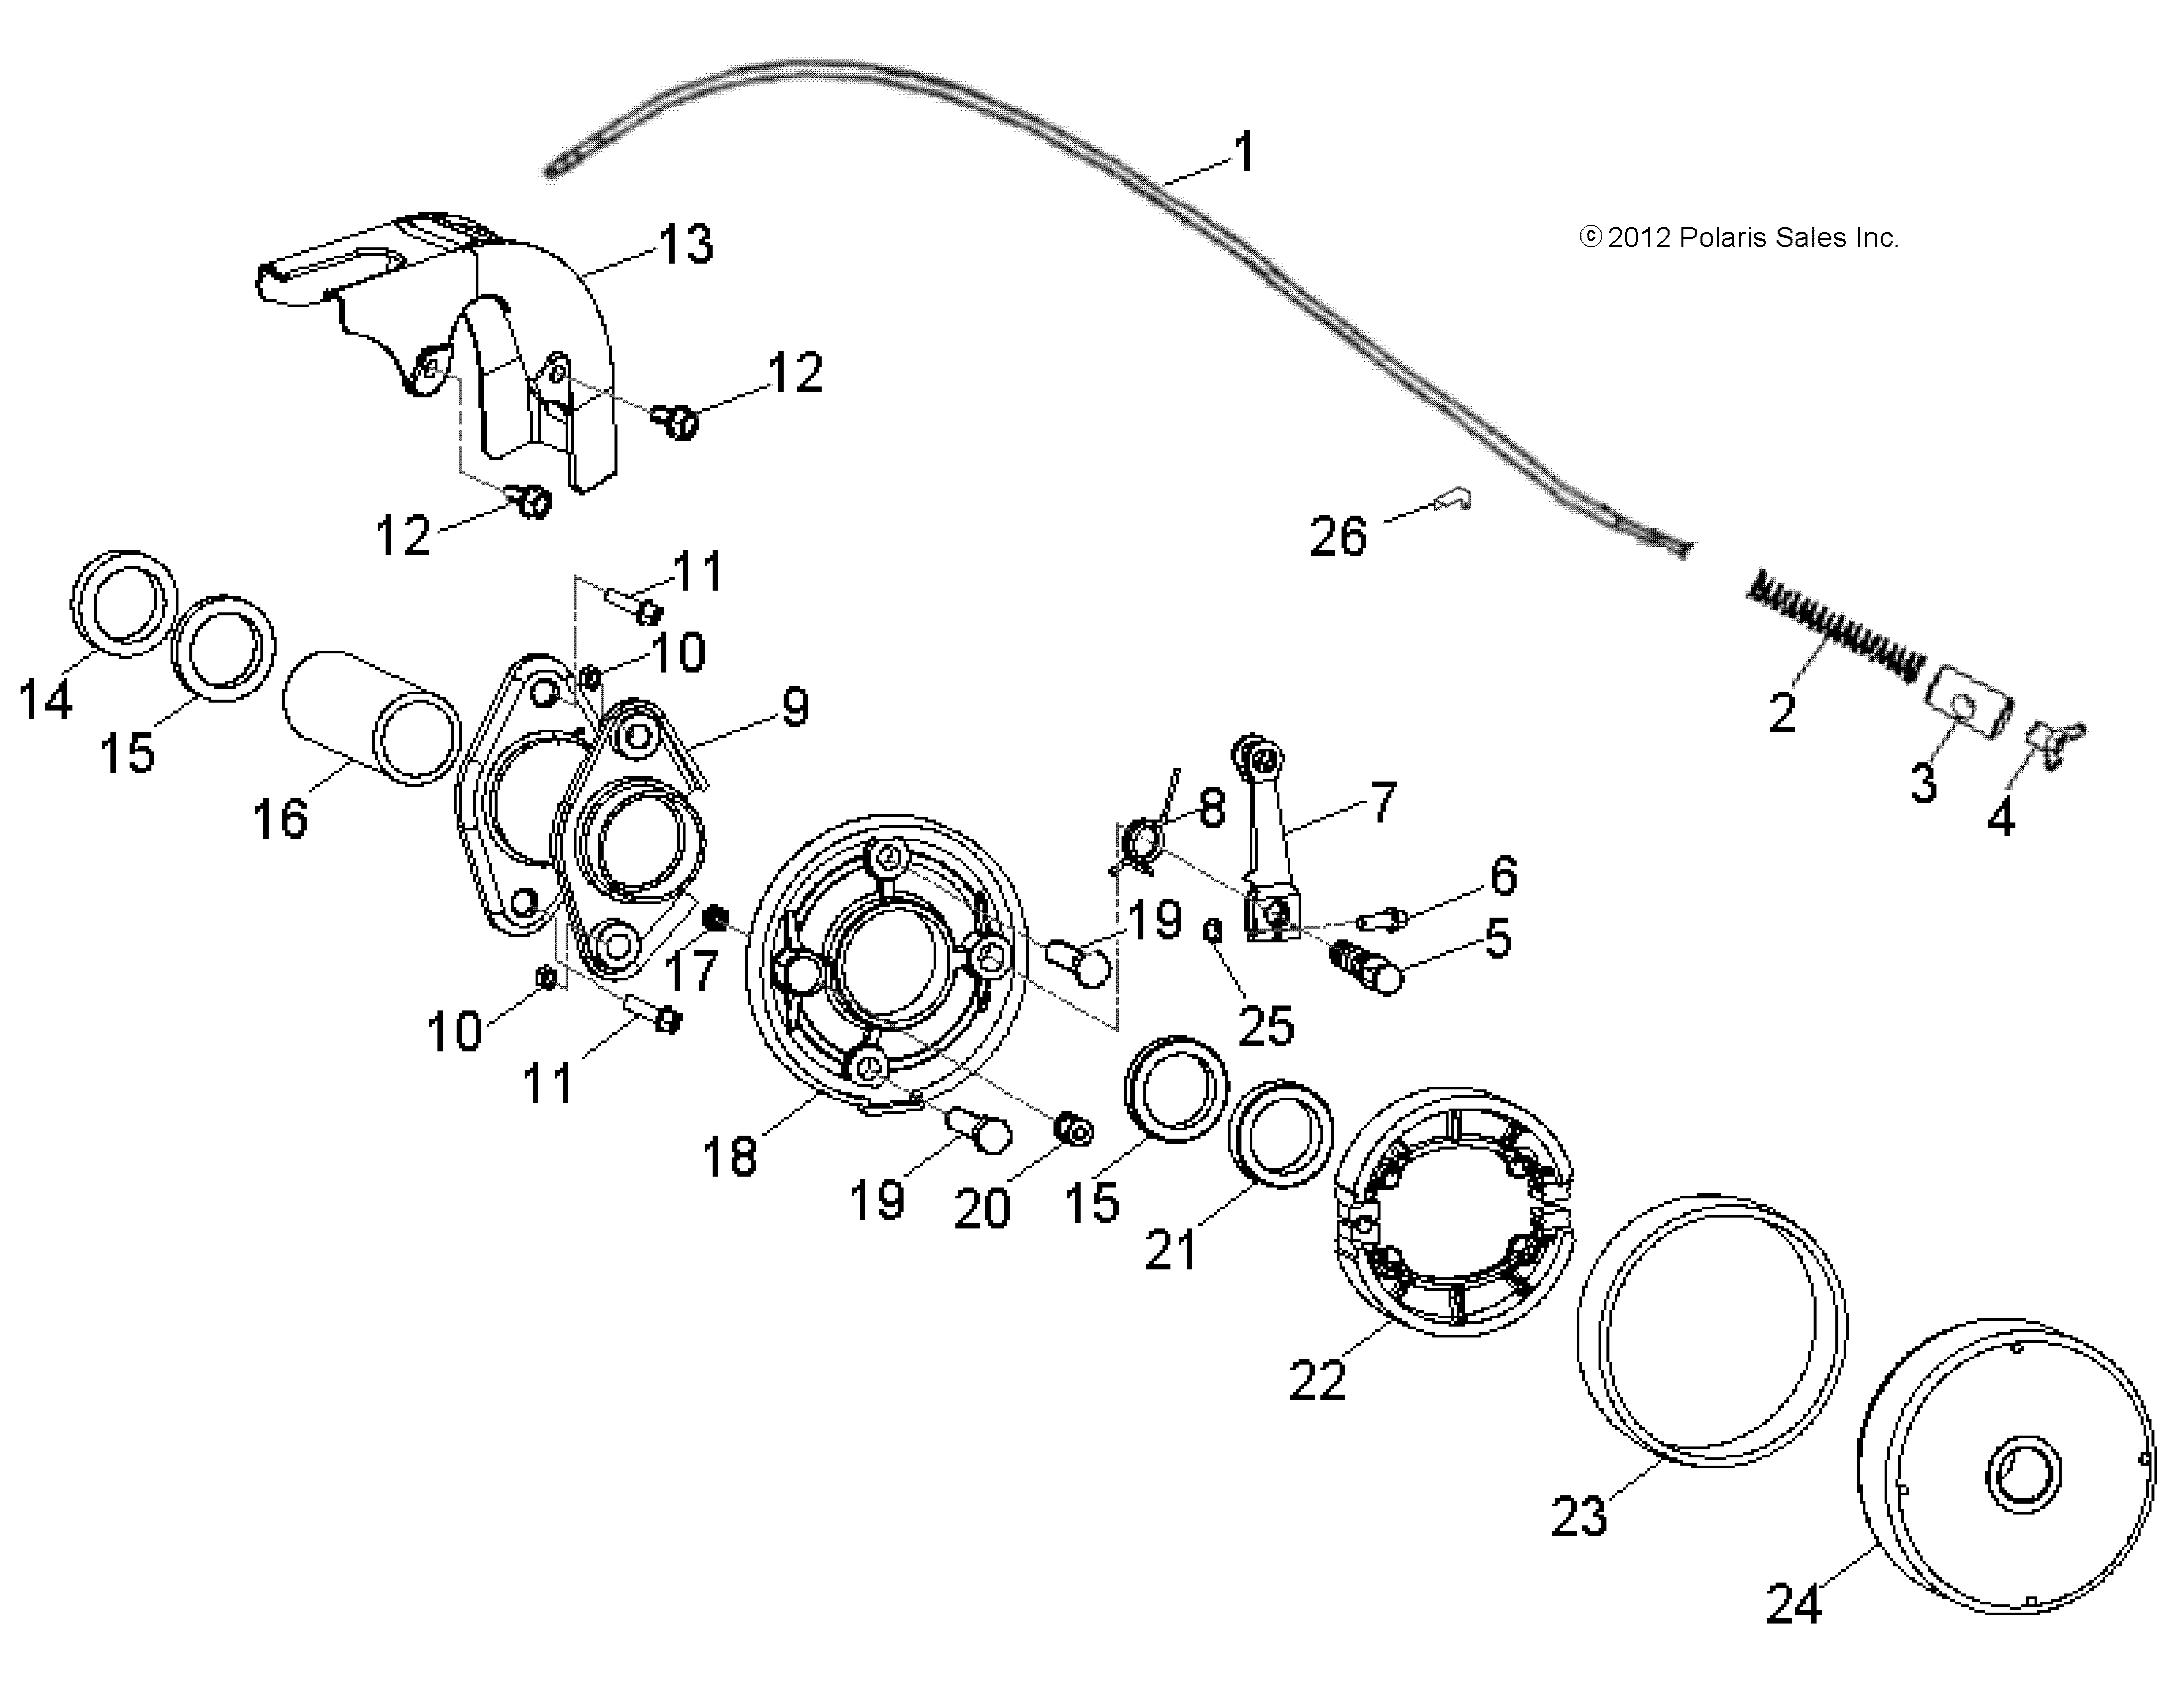 Part Number : 0454883 RETAINER-CABLE BRAKE